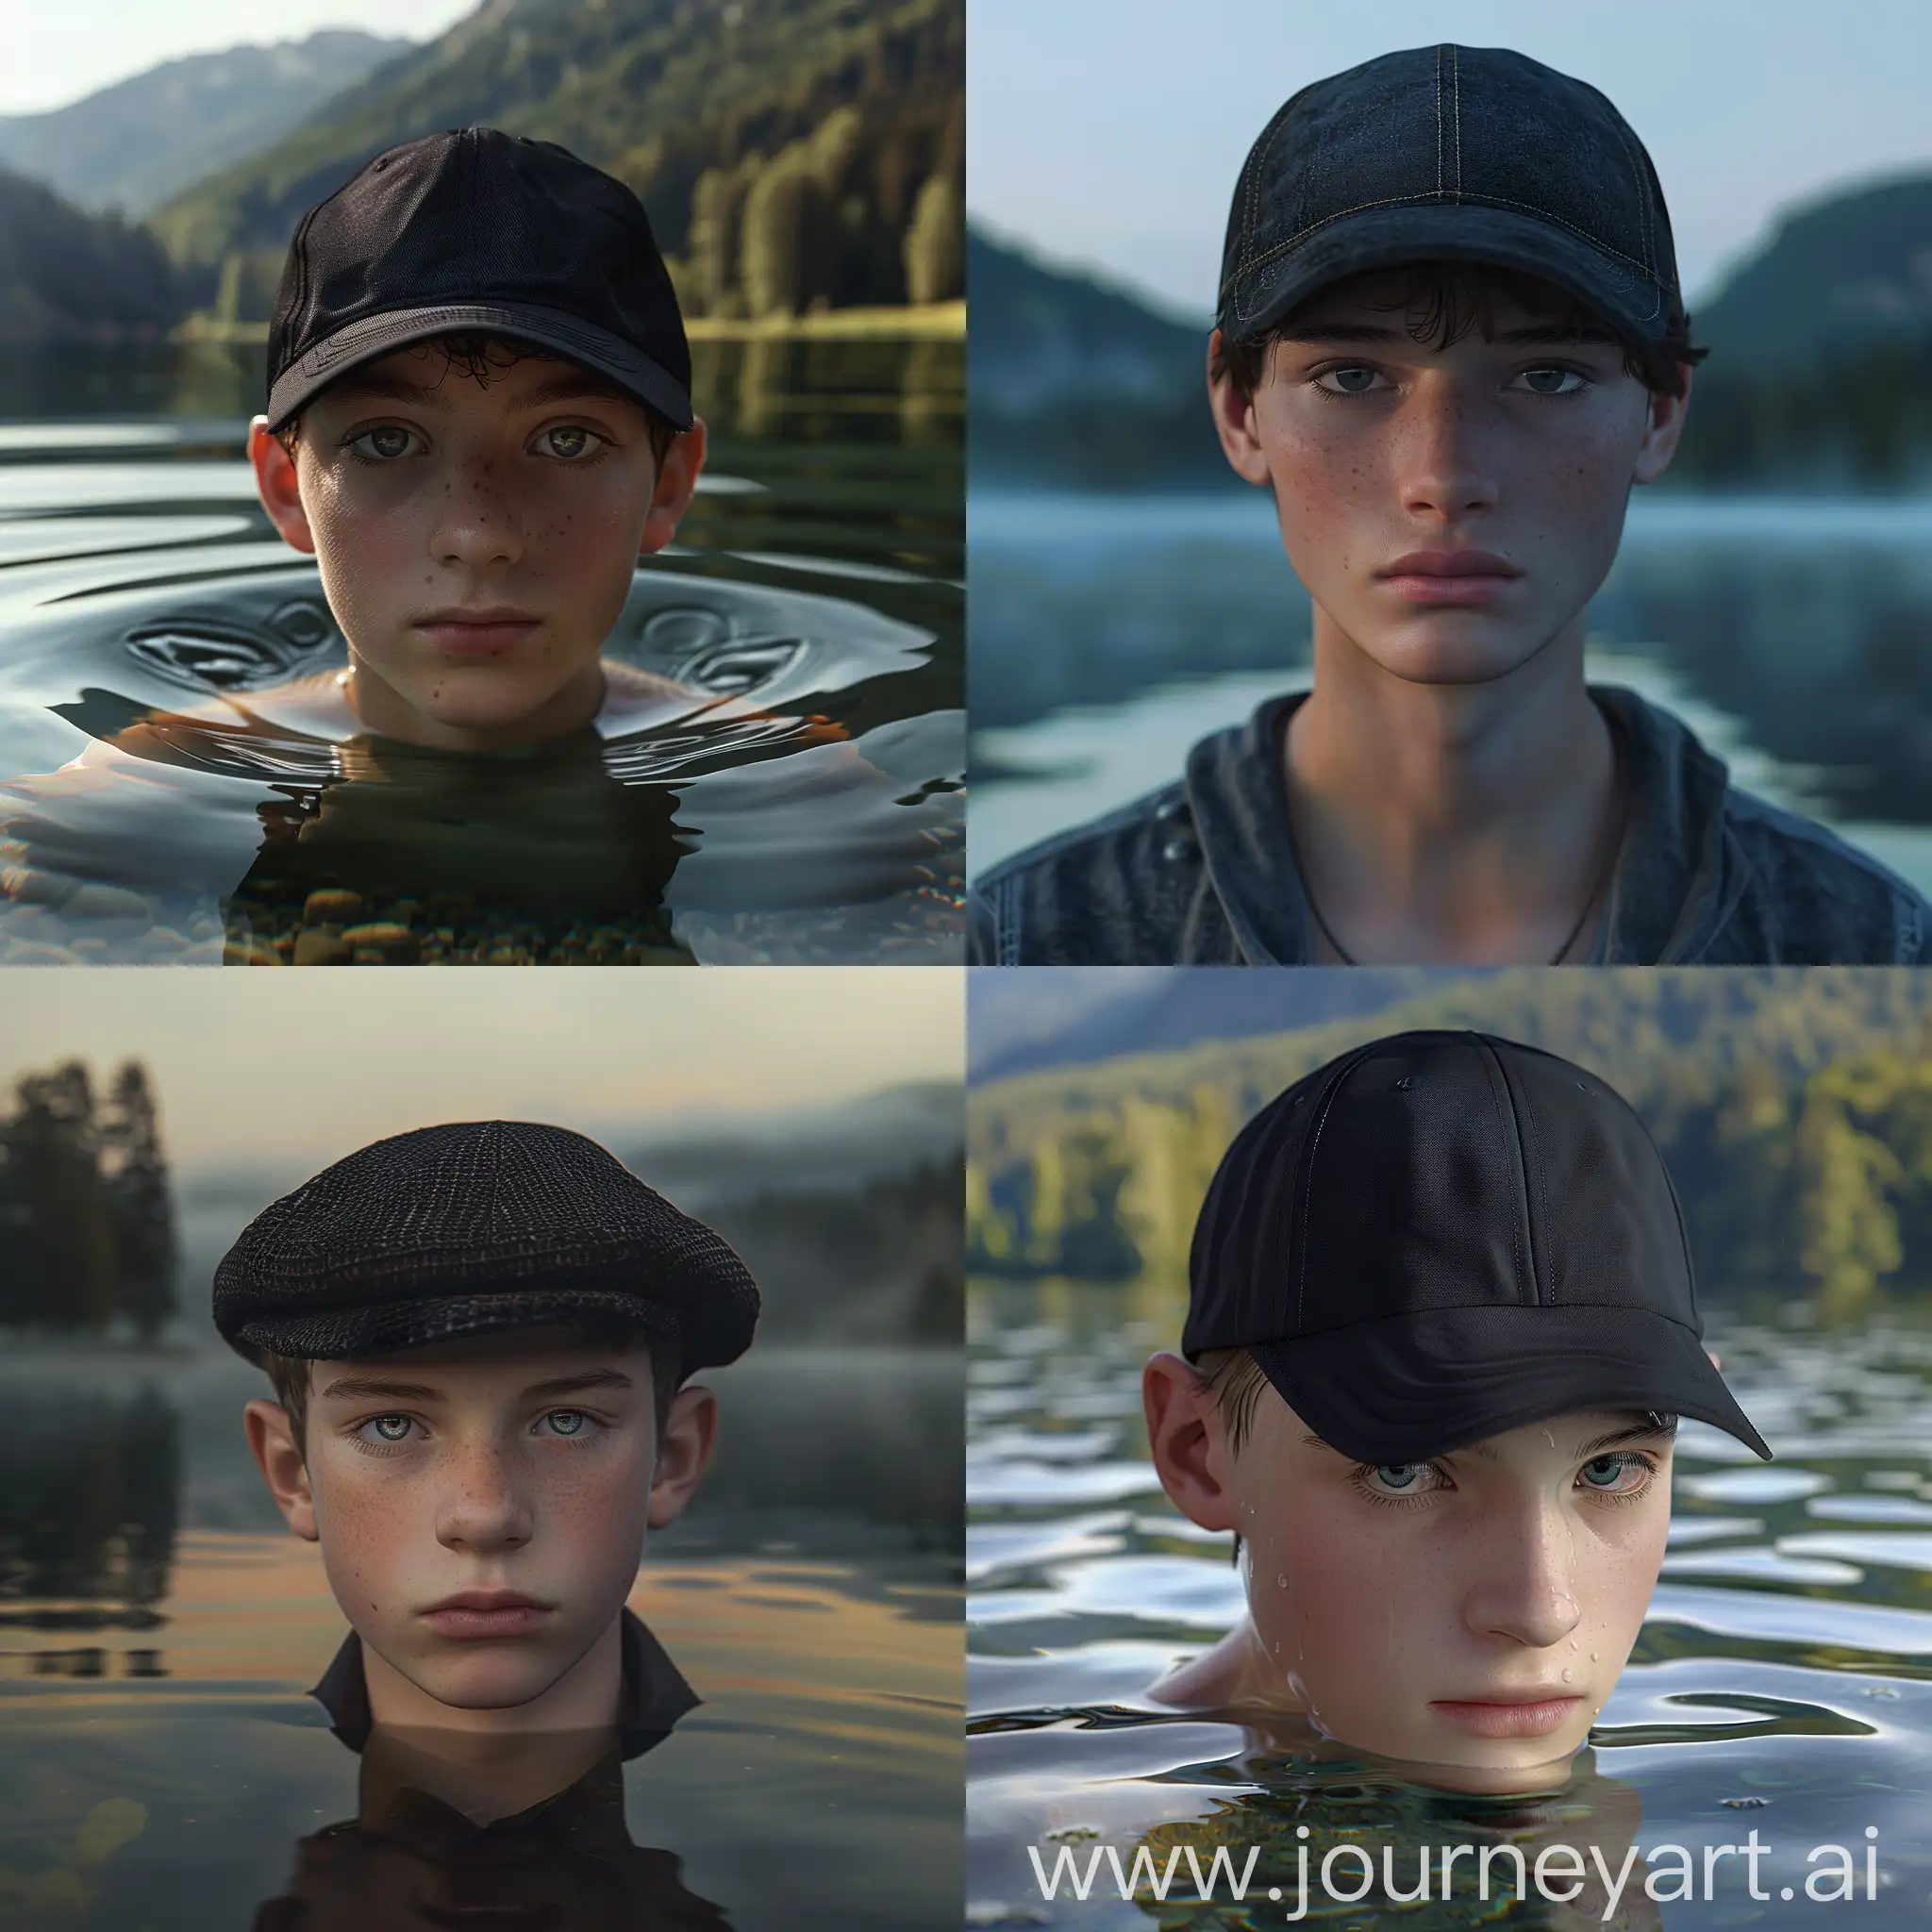 Make a boy in his early 20s wearing a black cap. The boy is handsome. He's on a lake somewhere in Europe. The image is extremely detailed and realistic. The colors are vivid. The image will be part of a marketing campaign of a cap company. A natural unaltered 4k photograph, high quality, high resolution